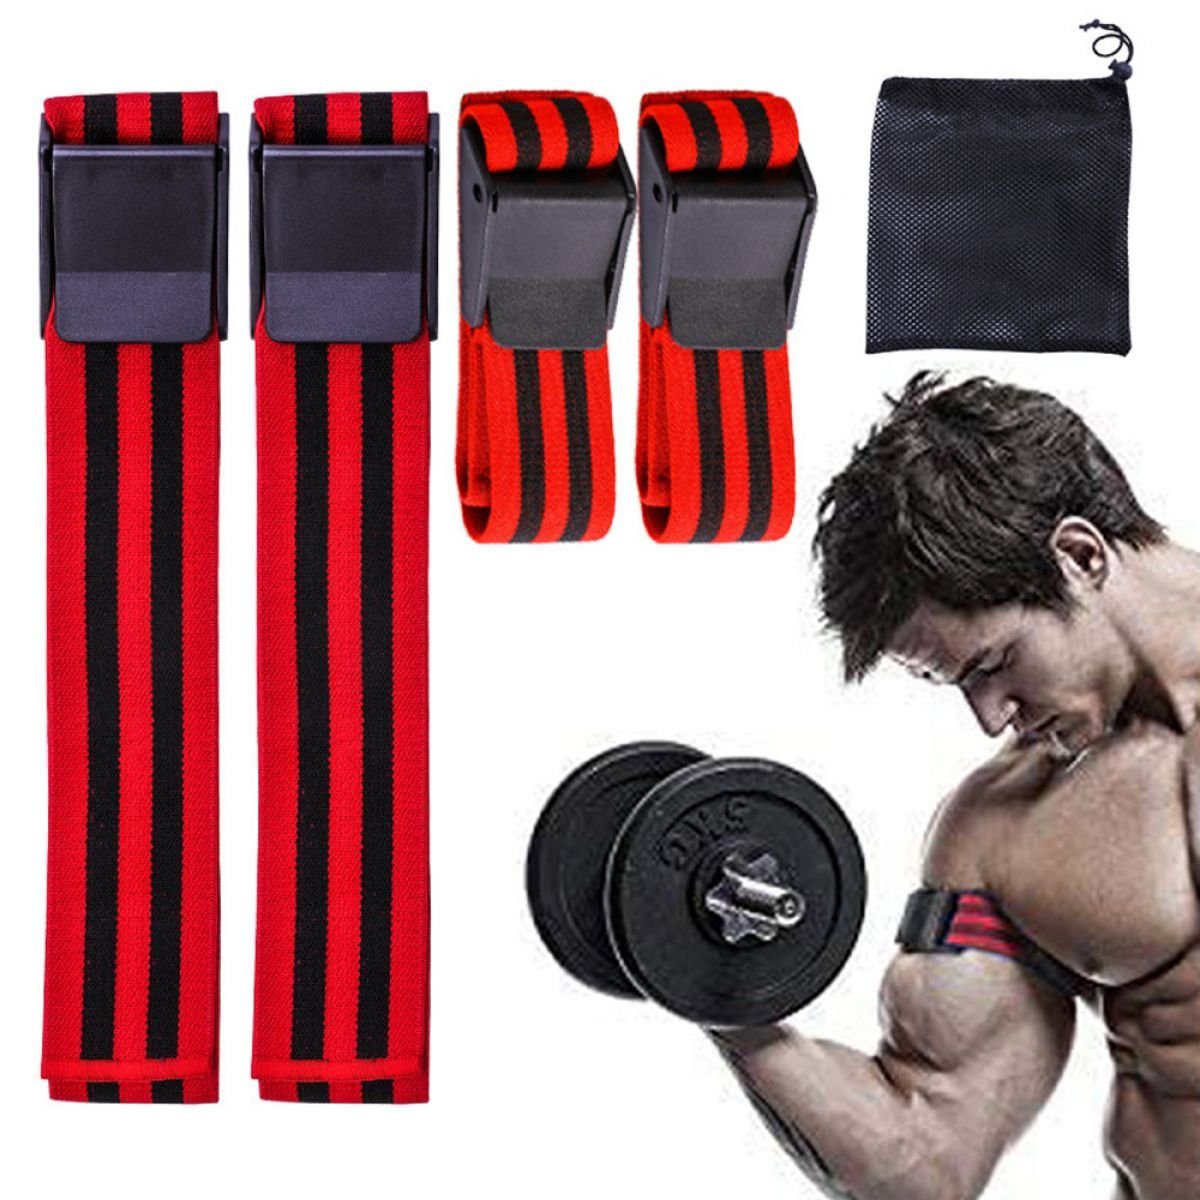 Hantel-Set Juoungle Bands Blood Bands, Training Flow Rot Restriction Occlusion